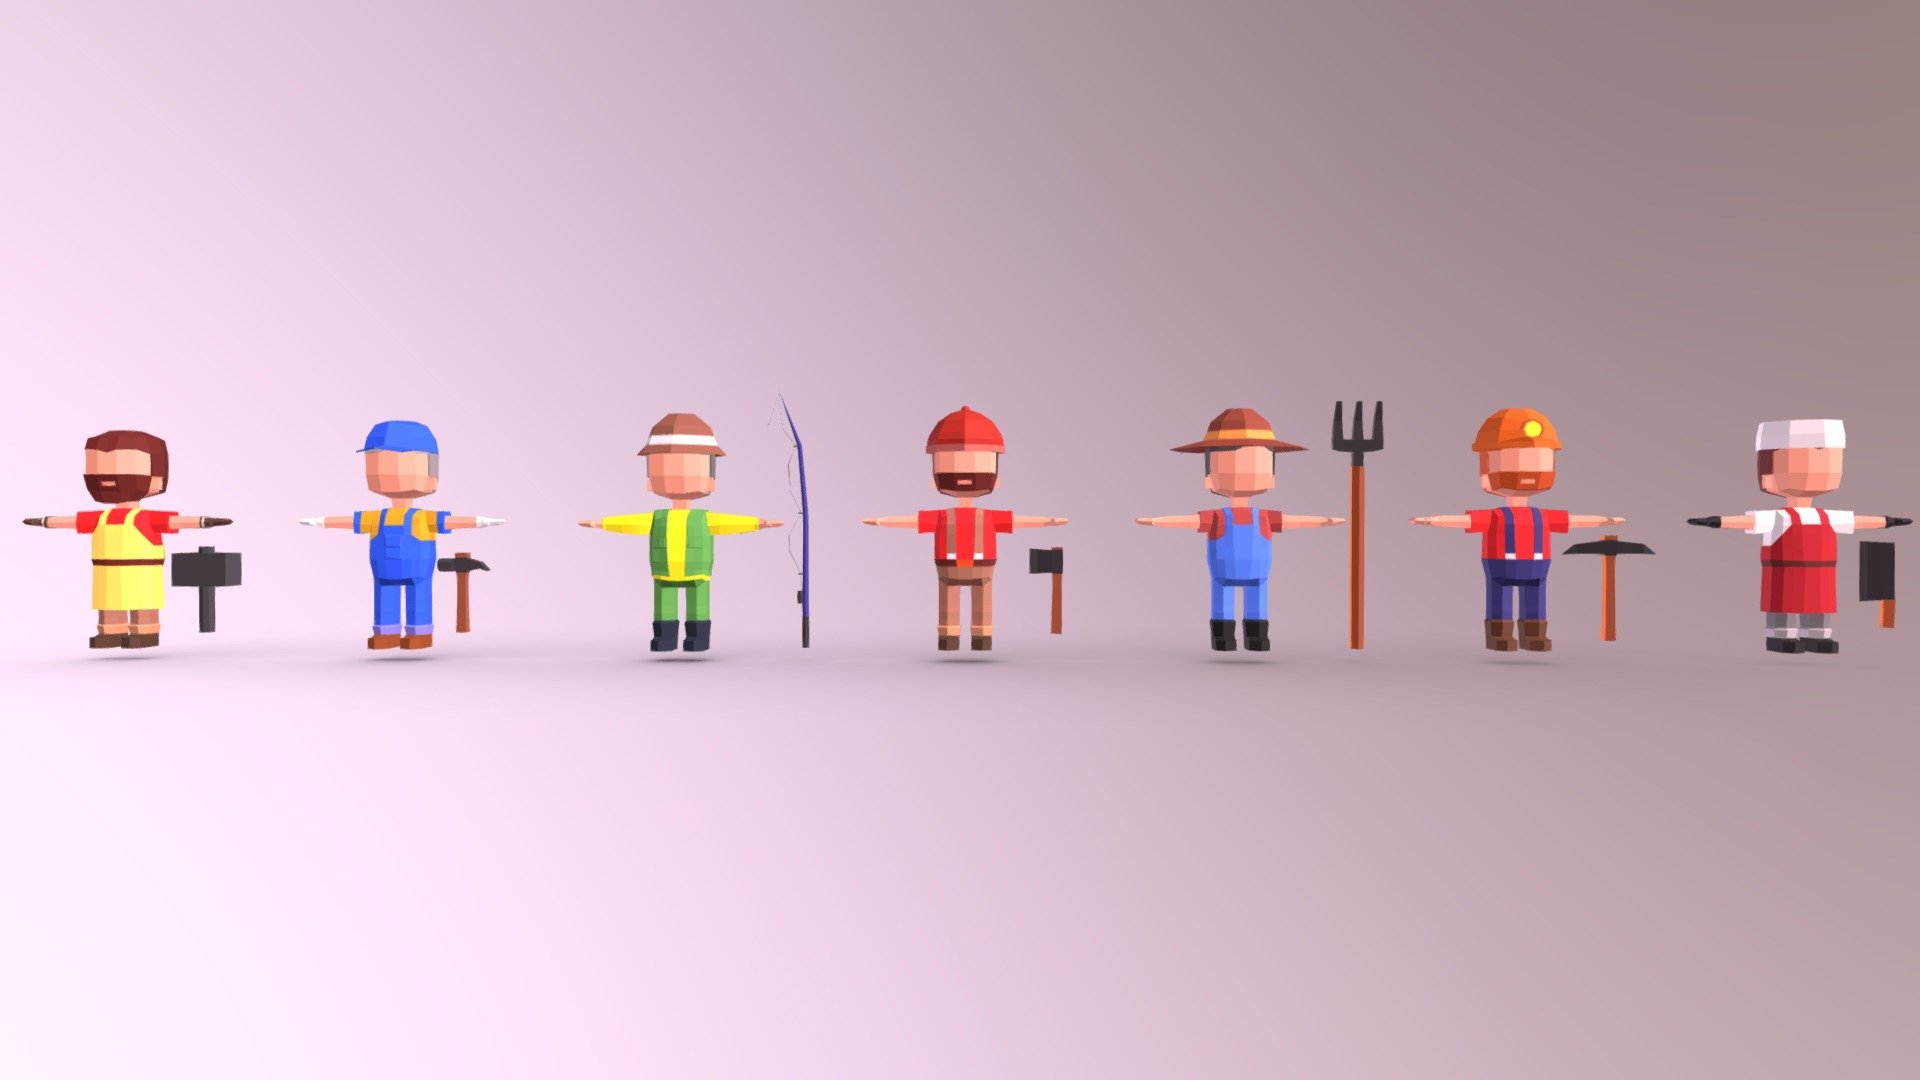 Asset for farming or town game.Contains different farming/gathering and building characters and tools.
7* lowpoly Farming  characters and tools.
you can now buy it on Unity Assetstore.:) - Farming Character Lowpoly - 3D model by RocoDev3D (@ronaldroco3d) 3d model